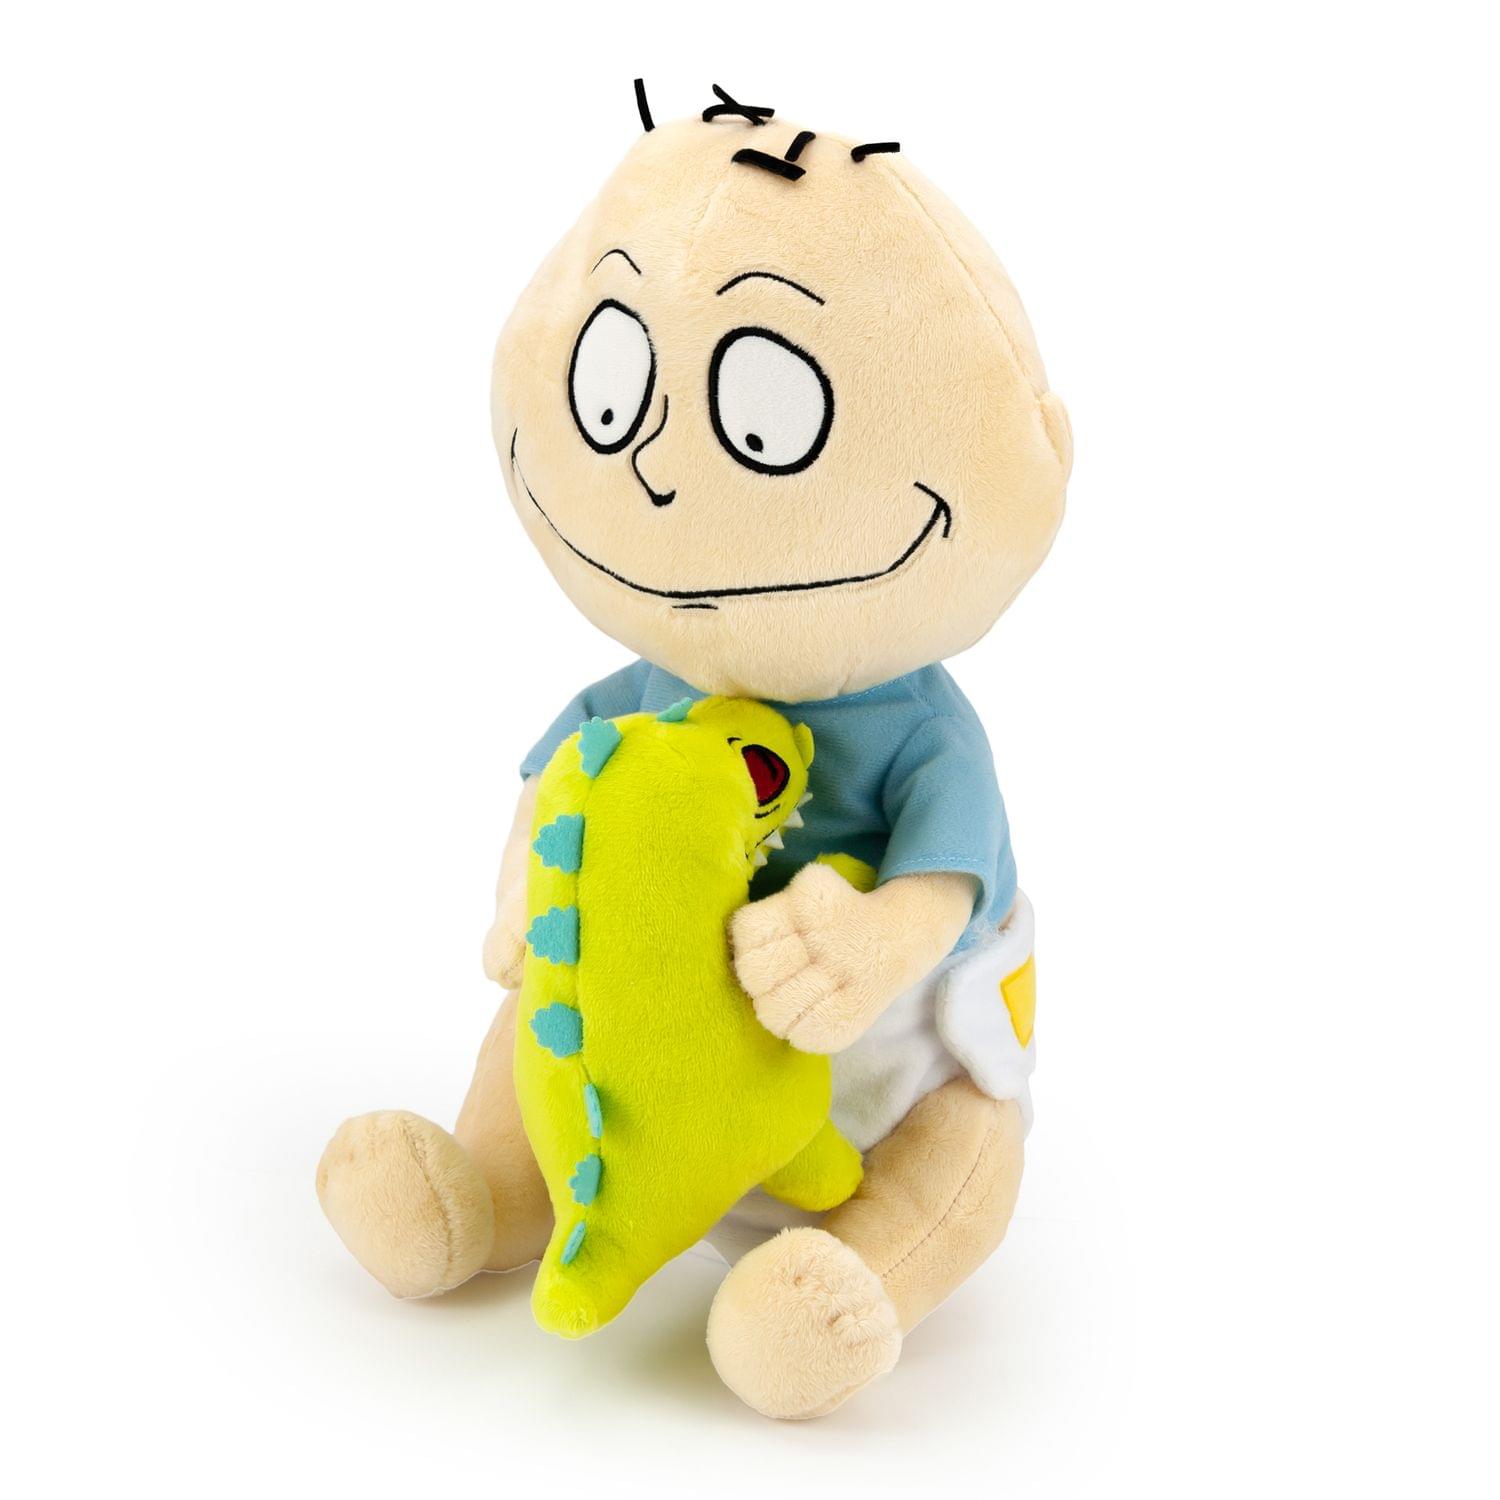 Nickelodeon Rugrats Tommy Pickles and Reptar Stuffed Plush Toy, 12"